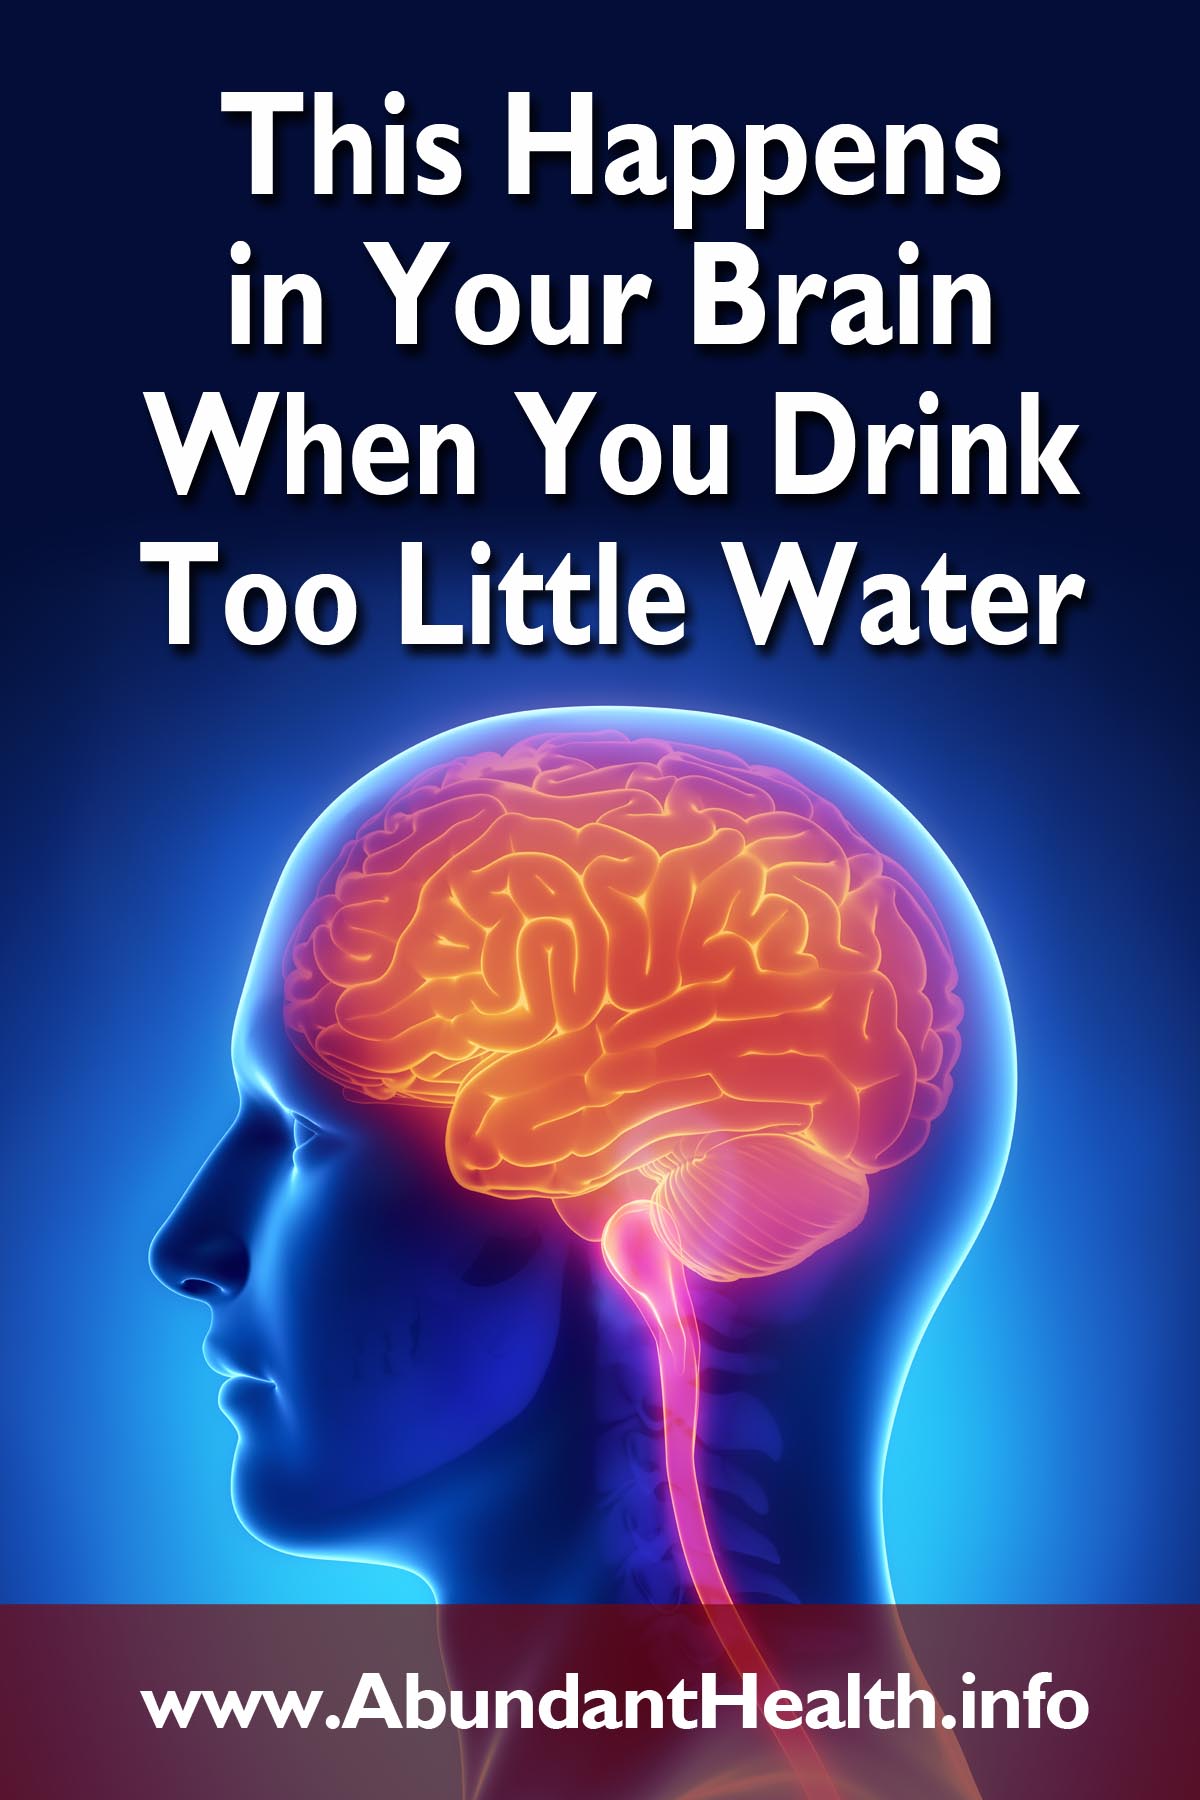 This Happens in Your Brain When You Drink Too Little Water